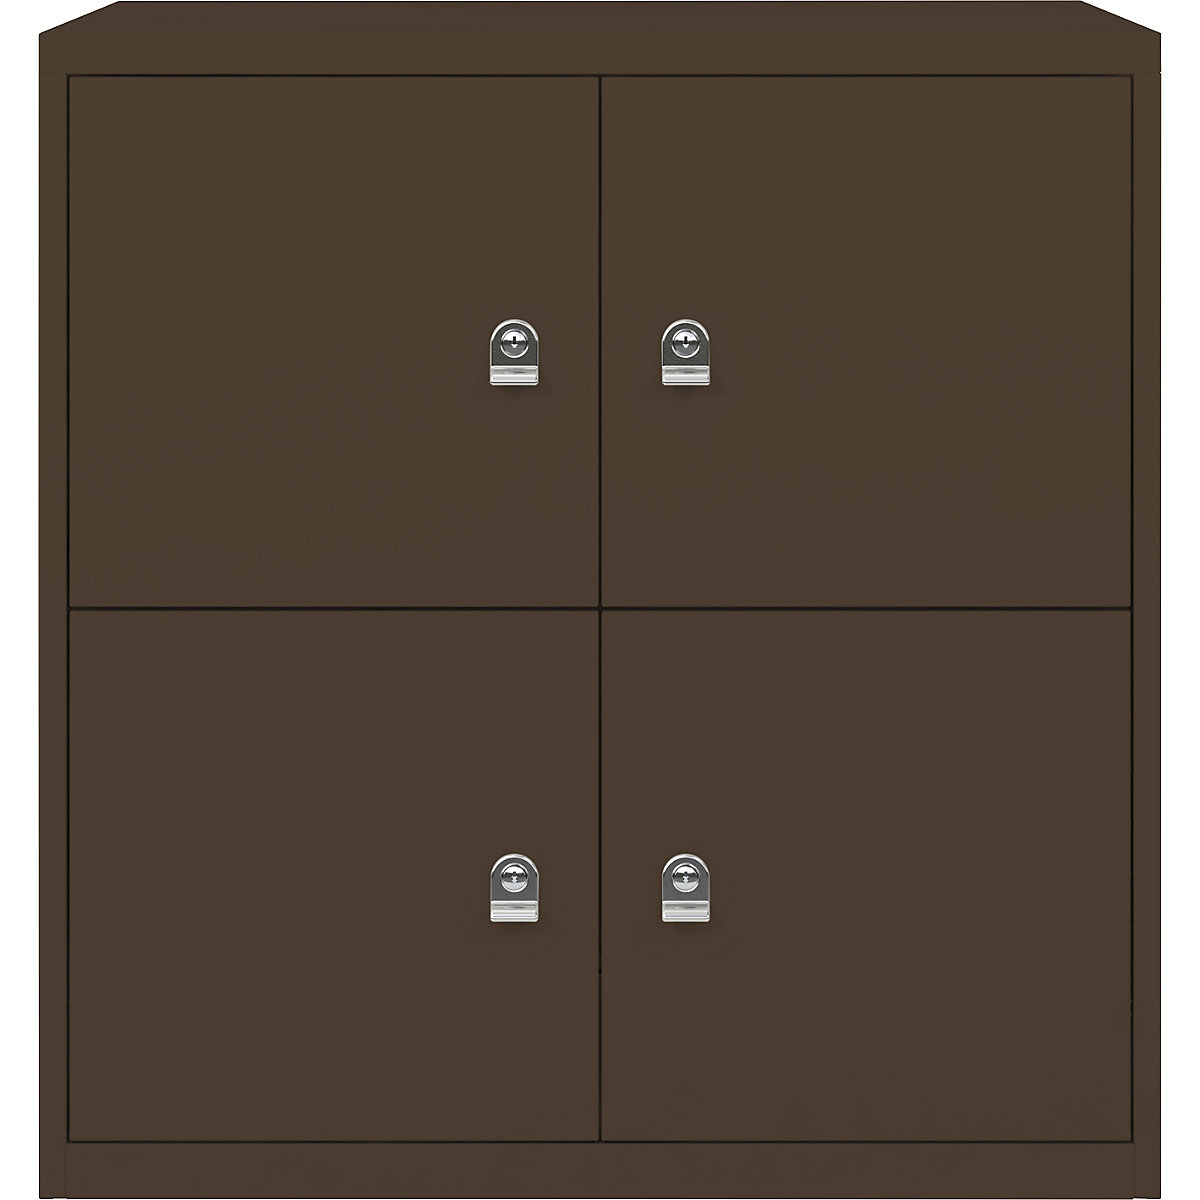 LateralFile™ lodge – BISLEY, with 4 lockable compartments, height 375 mm each, coffee